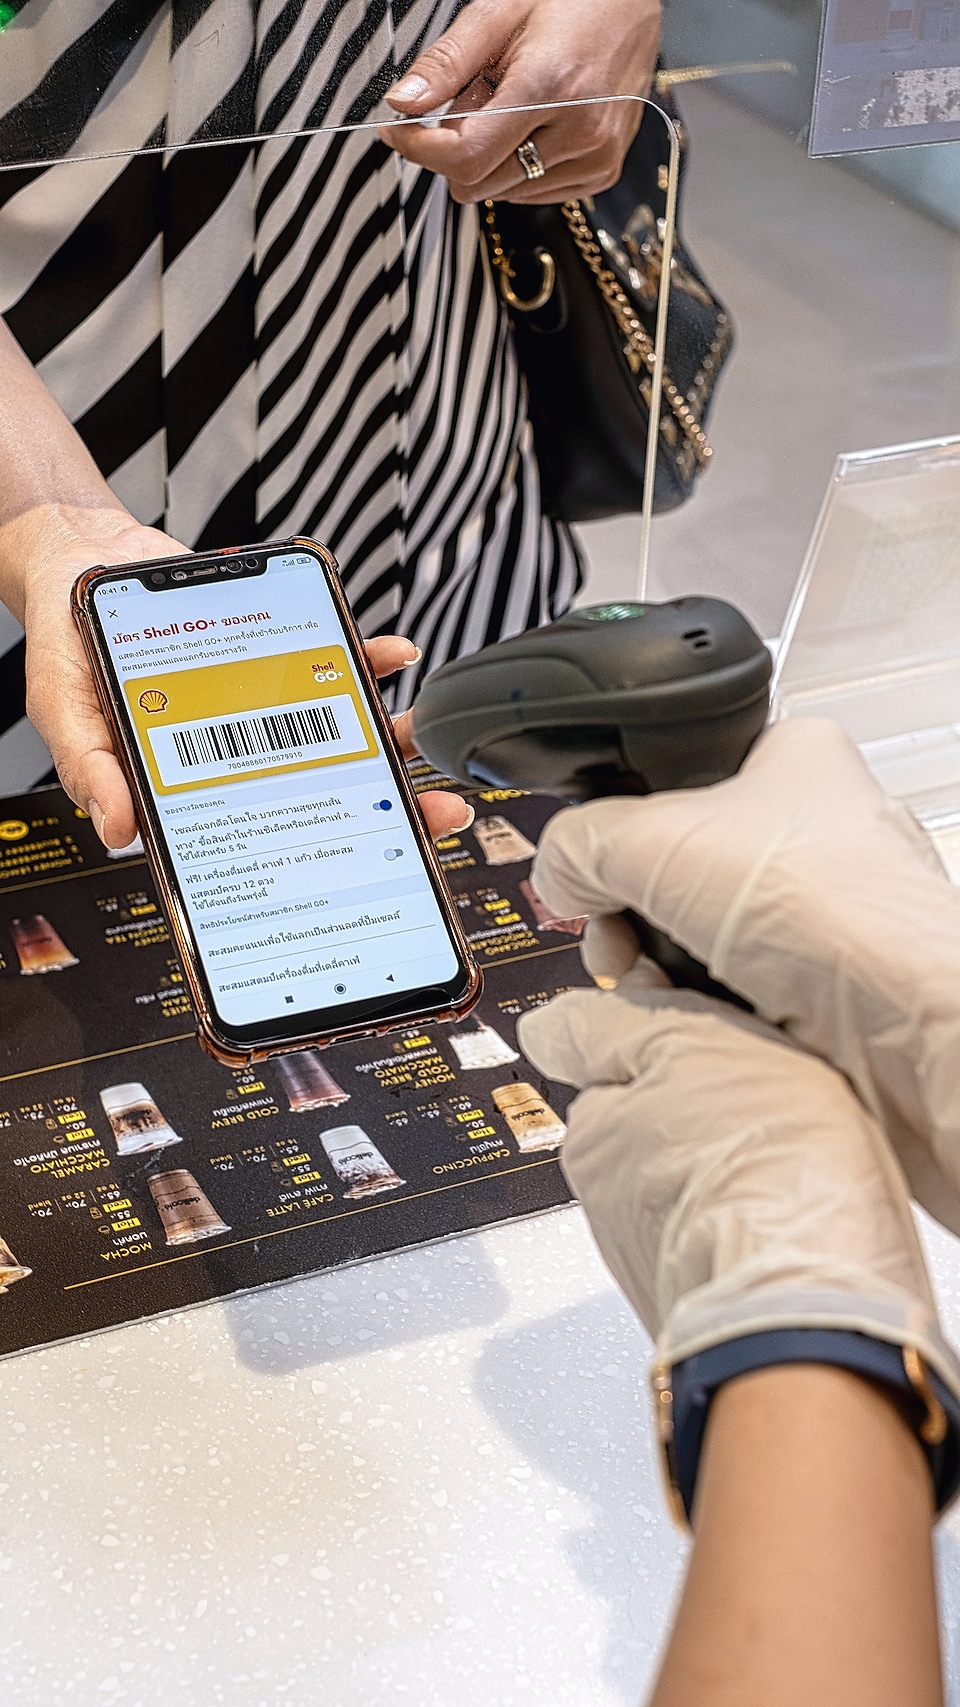 The Shell GO+ application, the digitised reward program for point collection and reward redemption